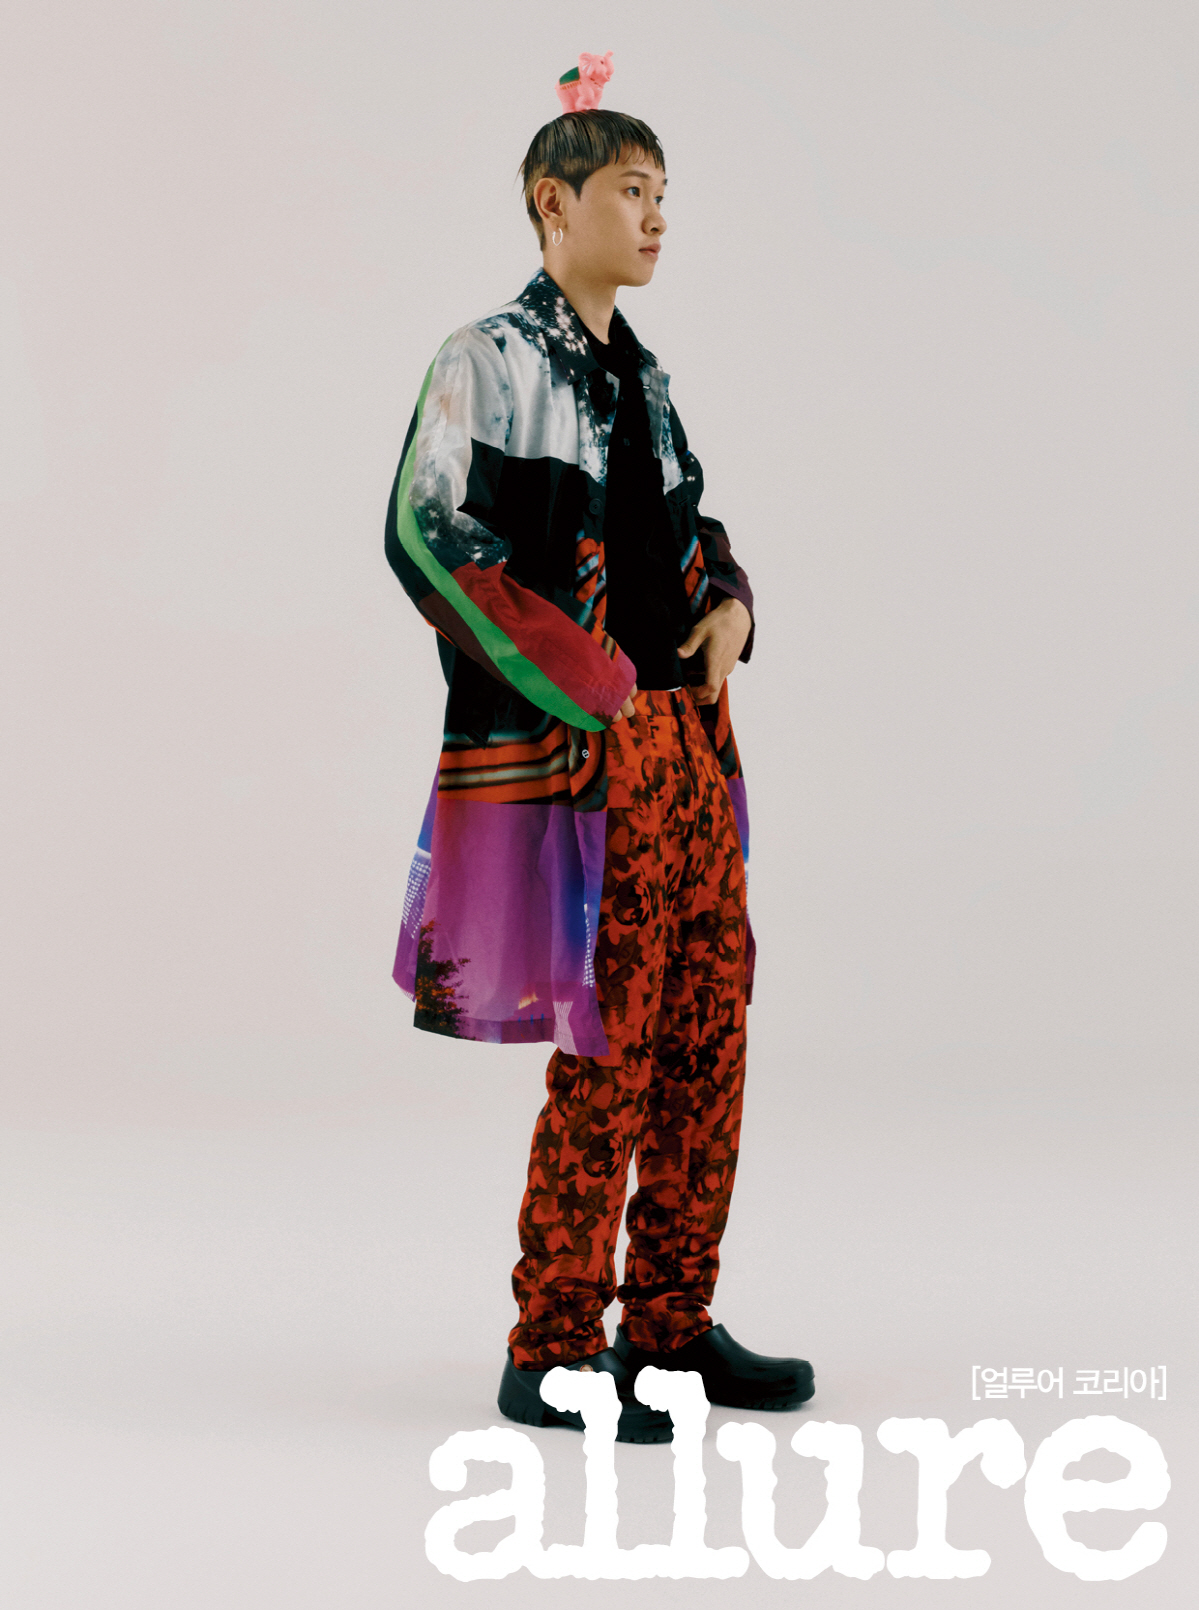 Crush, who recently introduced a new way of bus king through JTBC Music Healing Program Begin Again Korea, joined the photo shoot of fashion lifestyle magazine Allure Korea.In May, after the release of the first single Homemade series, Jana Kana was released, Crush took a pose without any awkwardness in the photo shoot, which was a concept of recorder props and unique delightful appearance.In an interview after the filming, he said, It was a comfortable shooting without burden, and said that it was interesting to shoot a new look.He laughed at many people in a depressed era, such as the music video of Class B emotion and the Jananana challenge using TicToc. Everyone is having a hard time.I just thought I wanted to laugh together, he said, hoping that more people could laugh through his music.The July issue of Allure Korea, which includes pictures and in-views with Crush, which will continue to look more different through the Homemade series, which shows songs that have been worked at home without going out, can be found at the national and online bookstores and Allure Korea website.